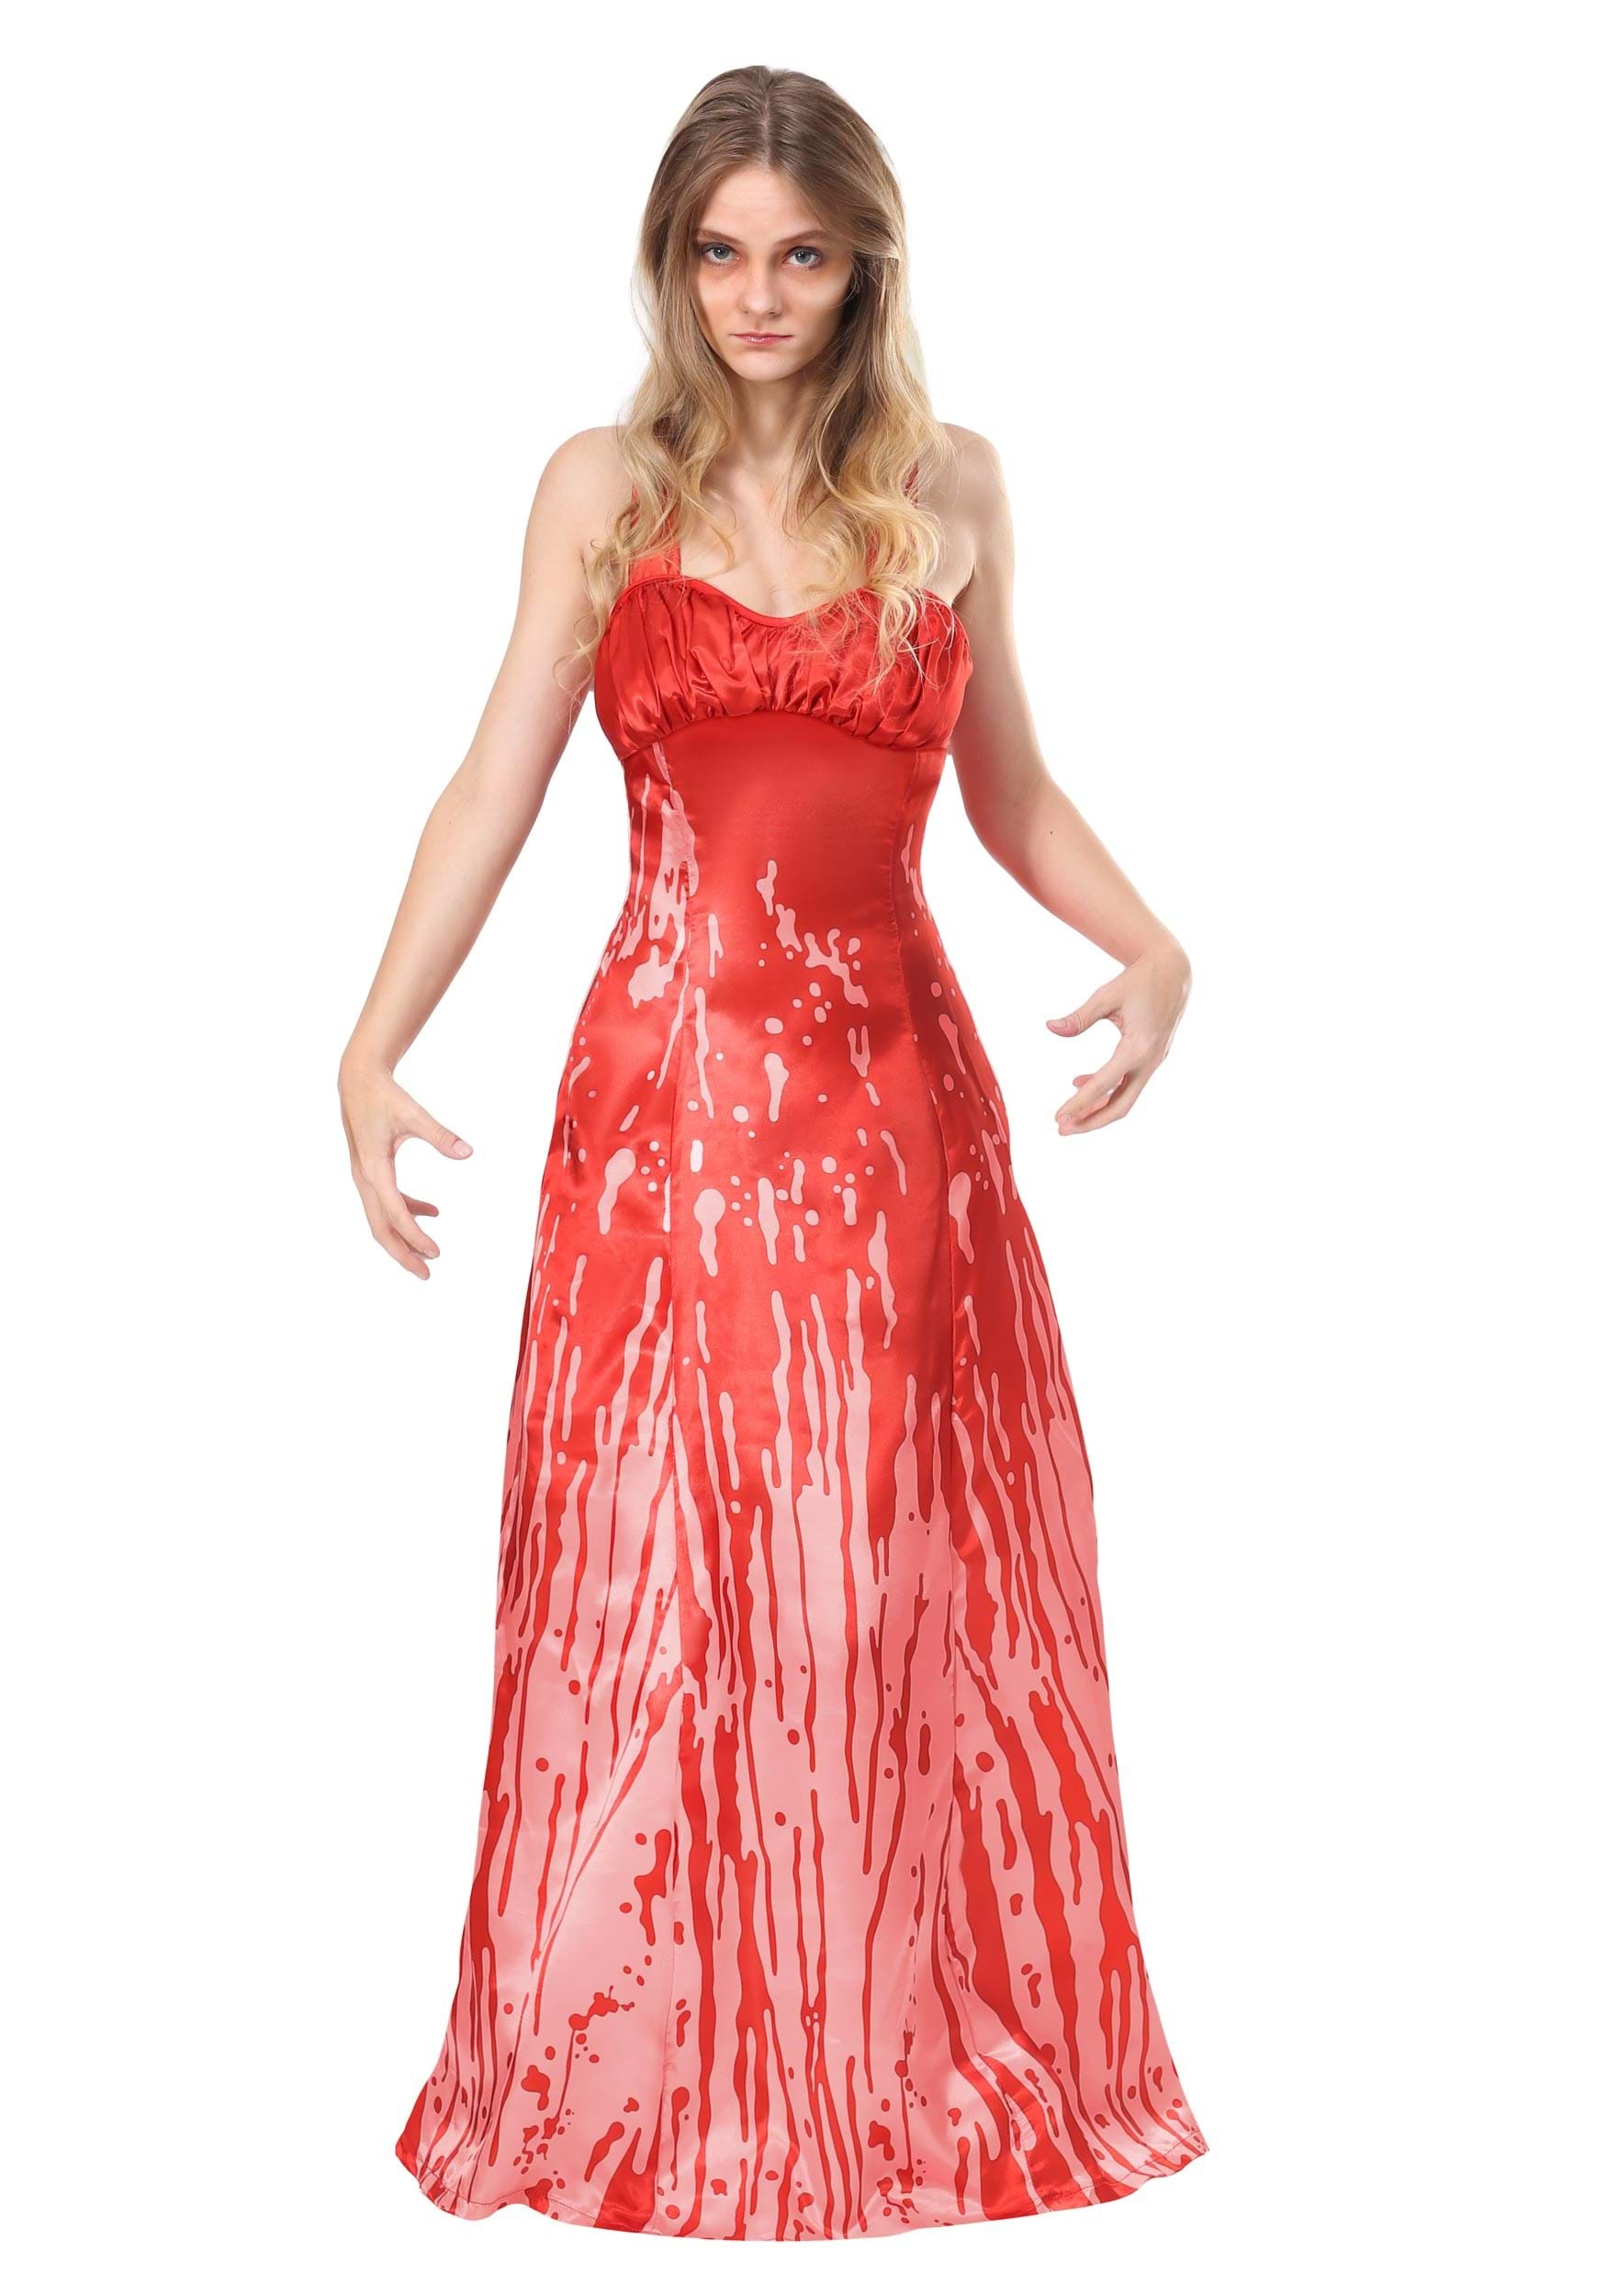 Photos - Fancy Dress FUN Costumes Carrie Costume for Women Orange/White